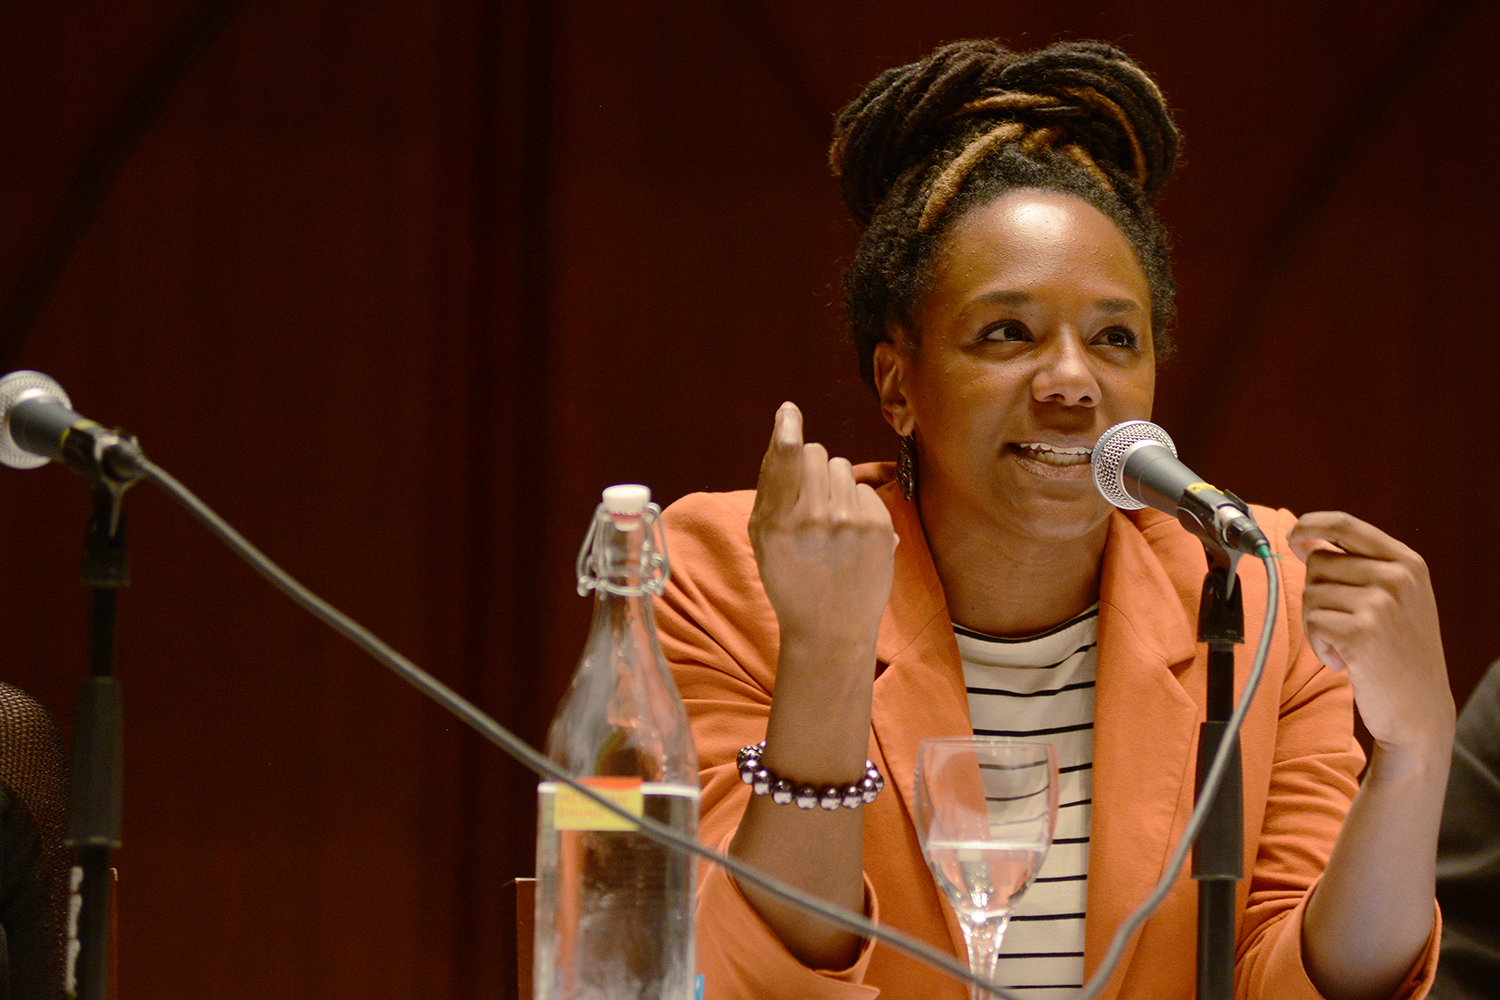 Bree Newsome is a graduate of New York University’s Tisch School of the Arts where she received a BFA in film and television. While still in high school, Newsome created an animated short, THE THREE PRINCES OF IDEA which earned her a $40,000 scholarship from the National Academy of Television Arts and Sciences. In August 2012, Newsome wrote and recorded a rap song, “SHAKE IT LIKE AN ETCH-A-SKETCH!”, skewering presidential candidate Mitt Romney and criticizing the Republican Party for policies that promote classism and bigotry. A staunch advocate for human rights and social justice, Newsome was arrested last year during a sit-in at the North Carolina State Capitol where she spoke out against the state’s recent attack on voting rights. She continues to work as an activist and youth organizer in North Carolina, serving in the capacity of Western Field Organizer for the youth-led organization Ignite NC.